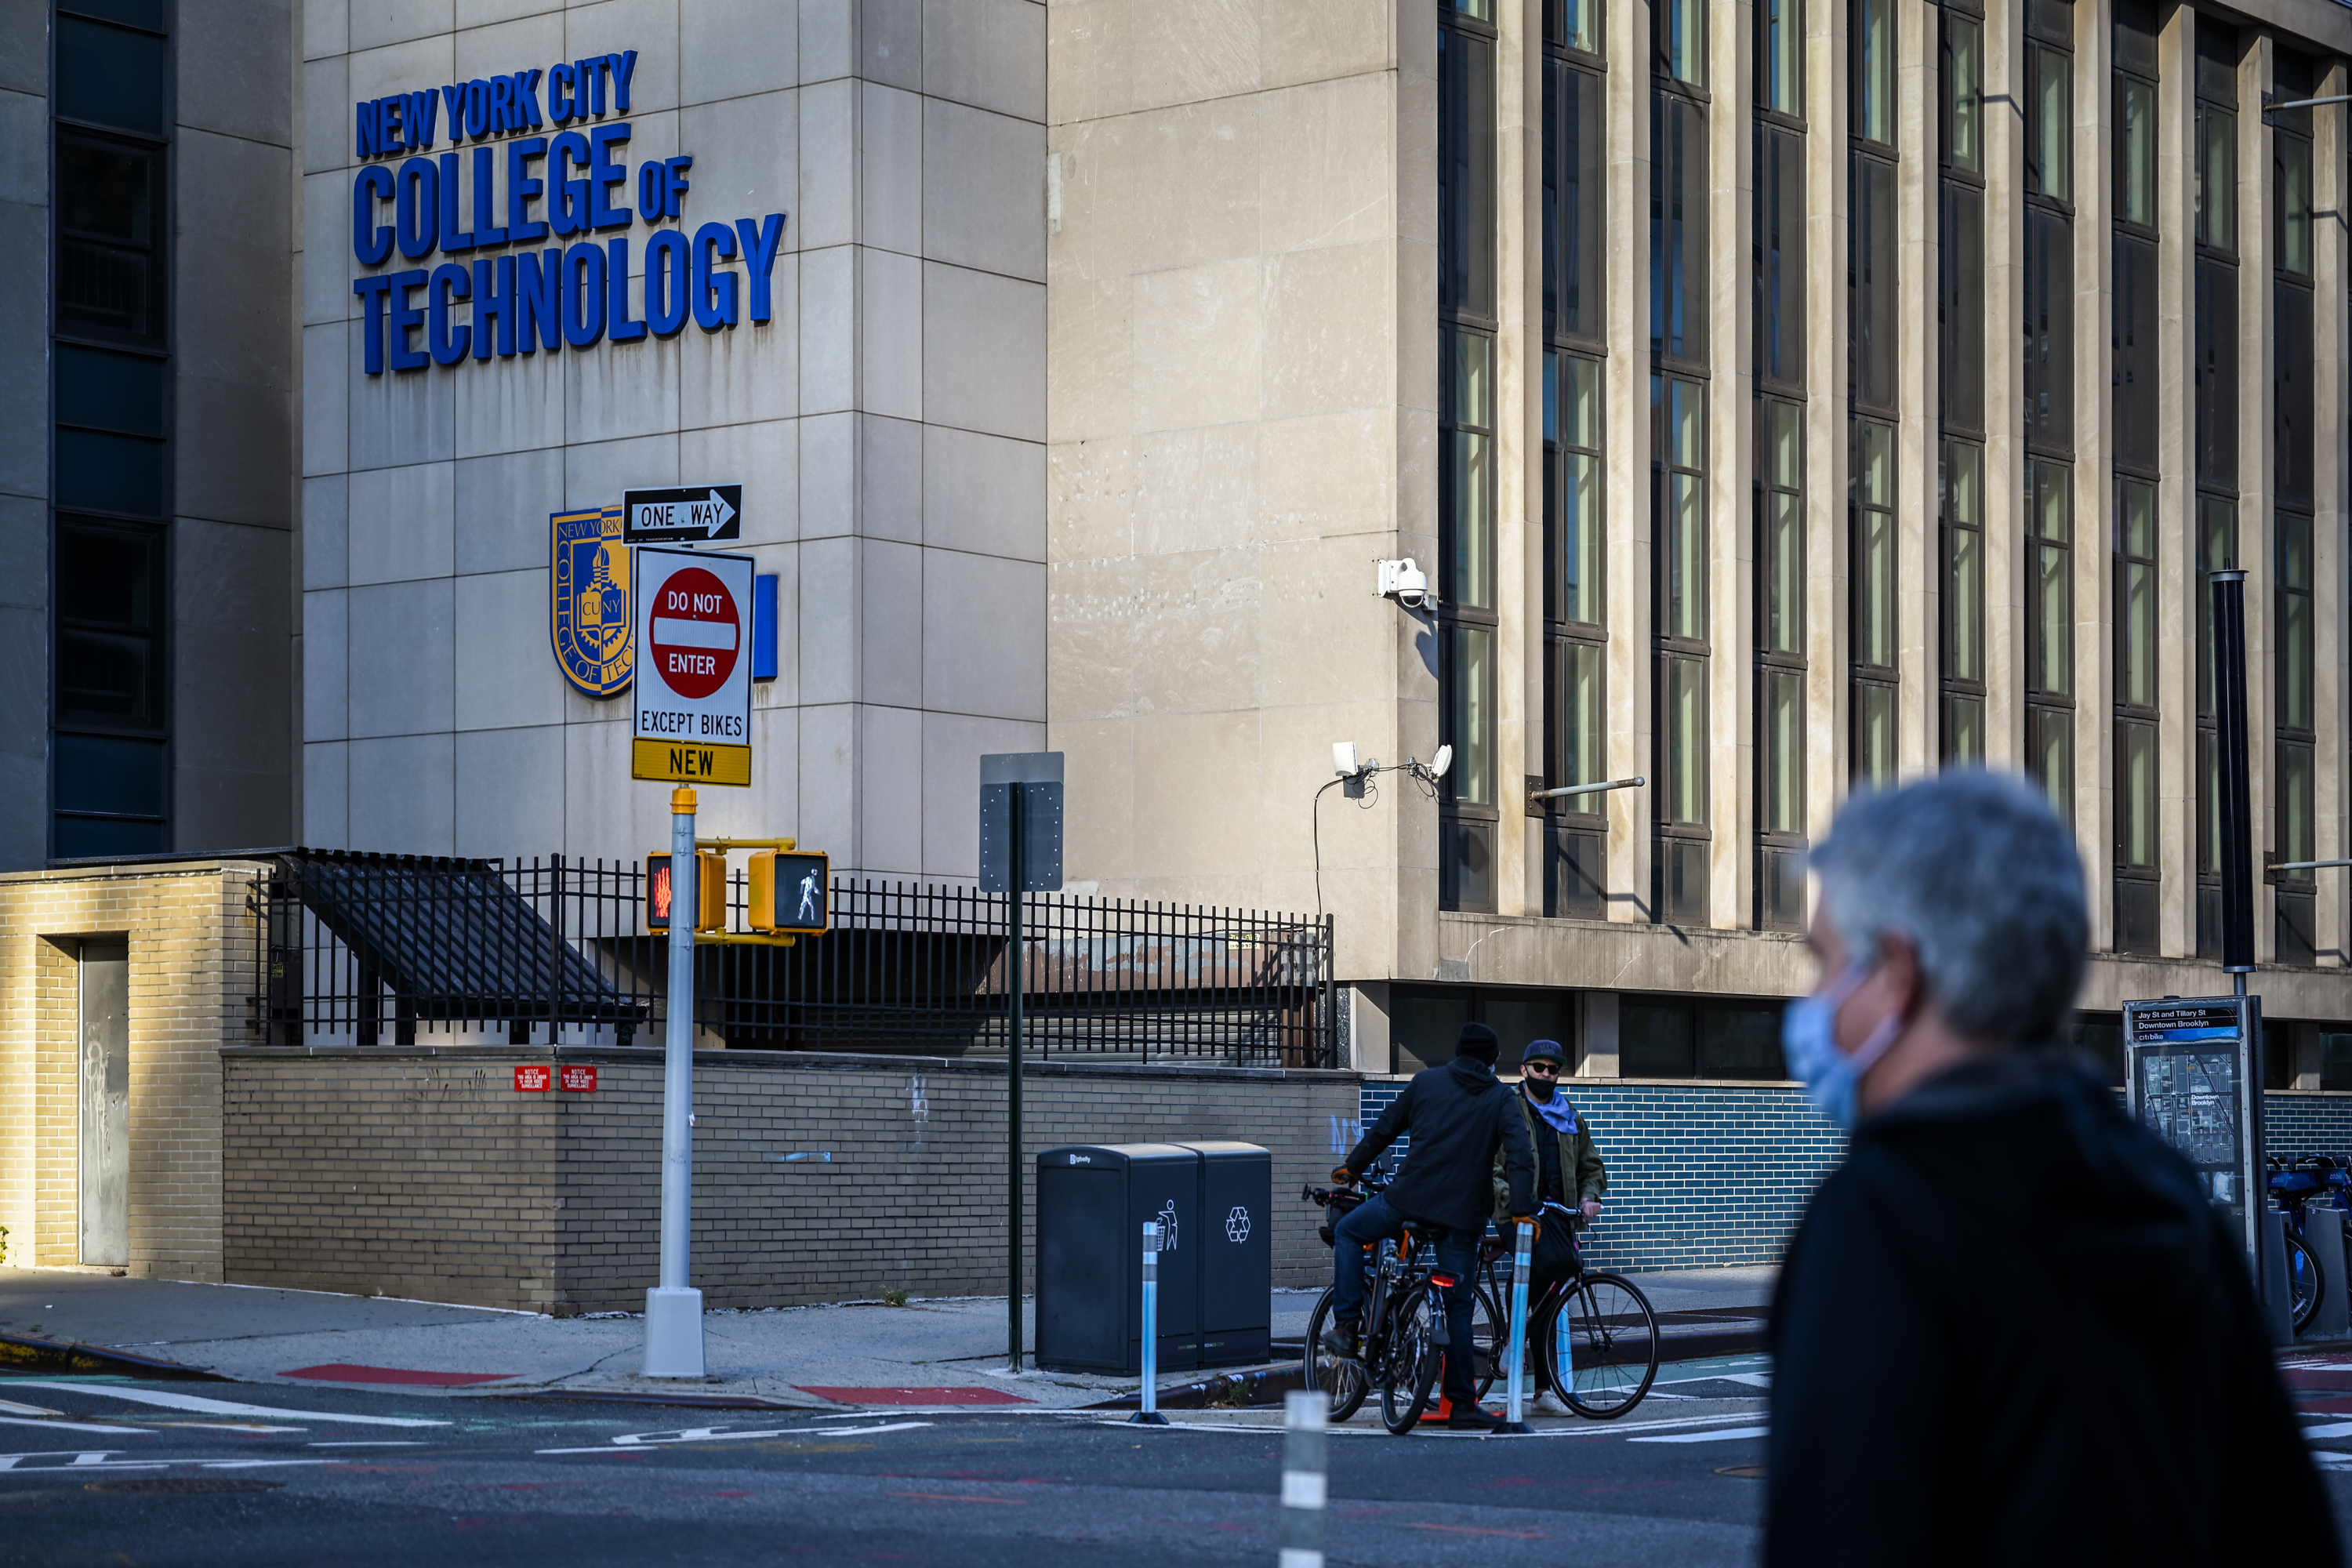 CUNY’s College of Technology in downtown Brooklyn, Nov. 20, 2020.